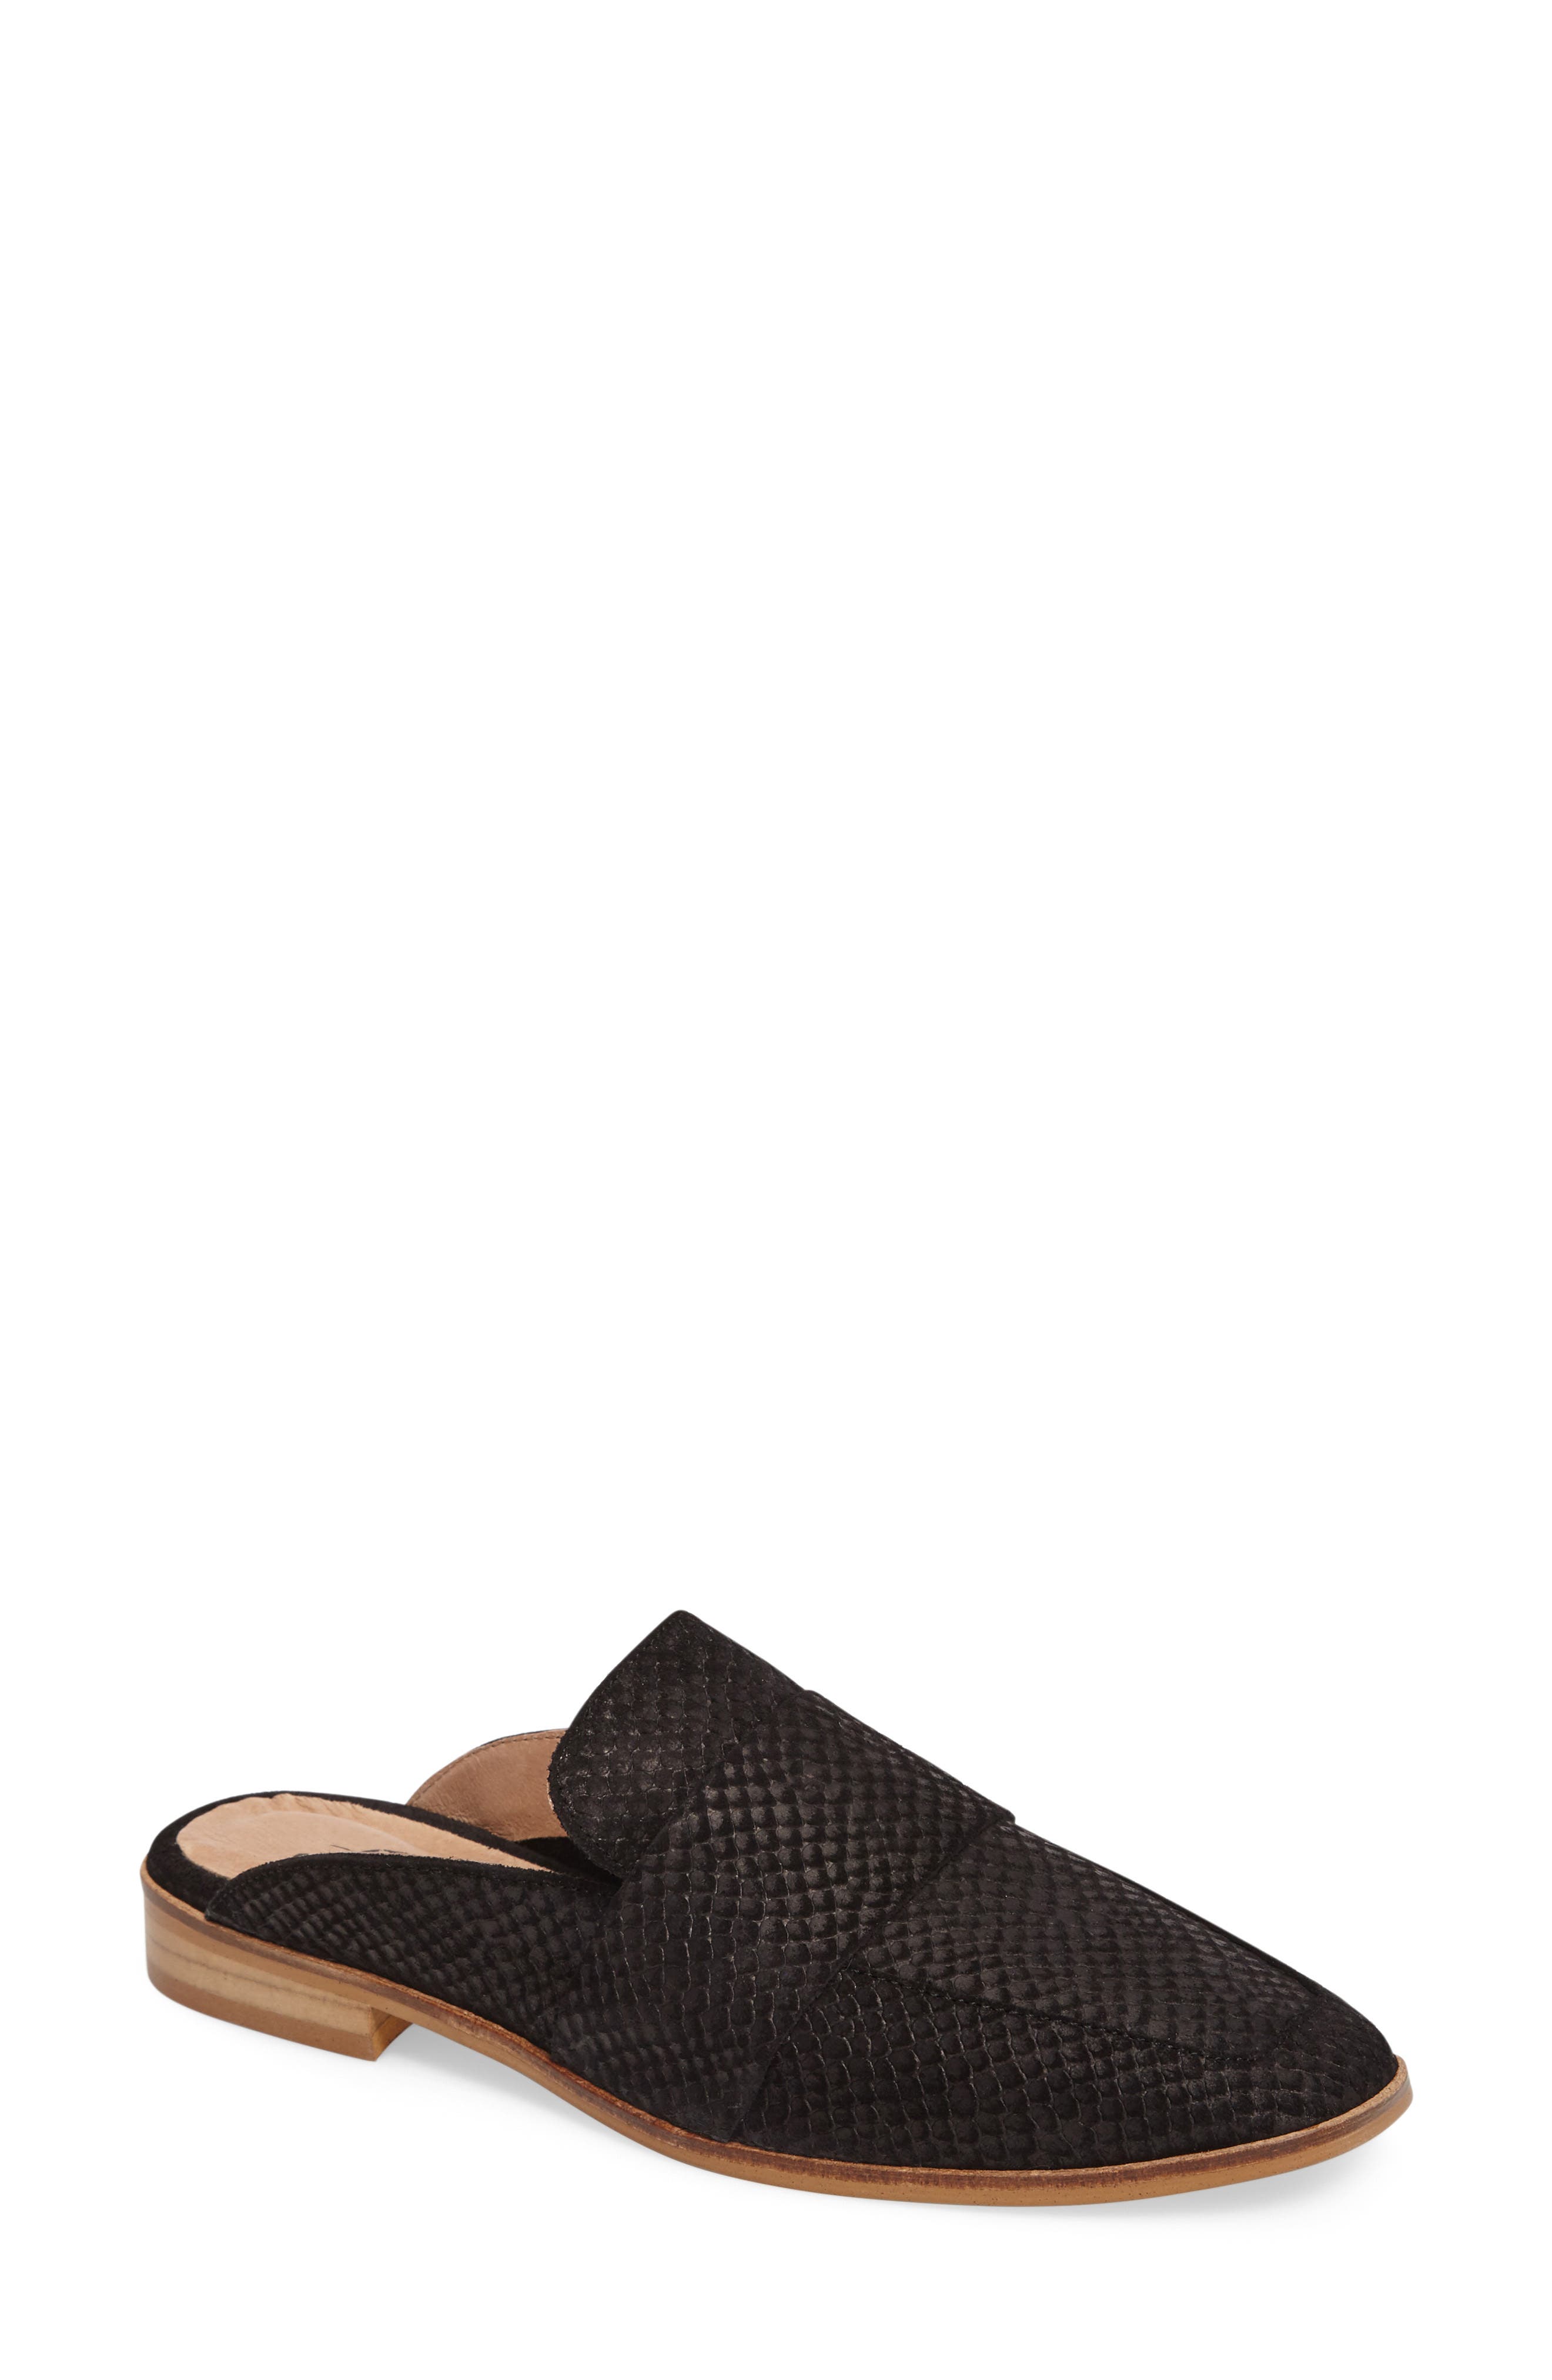 free people leather mules